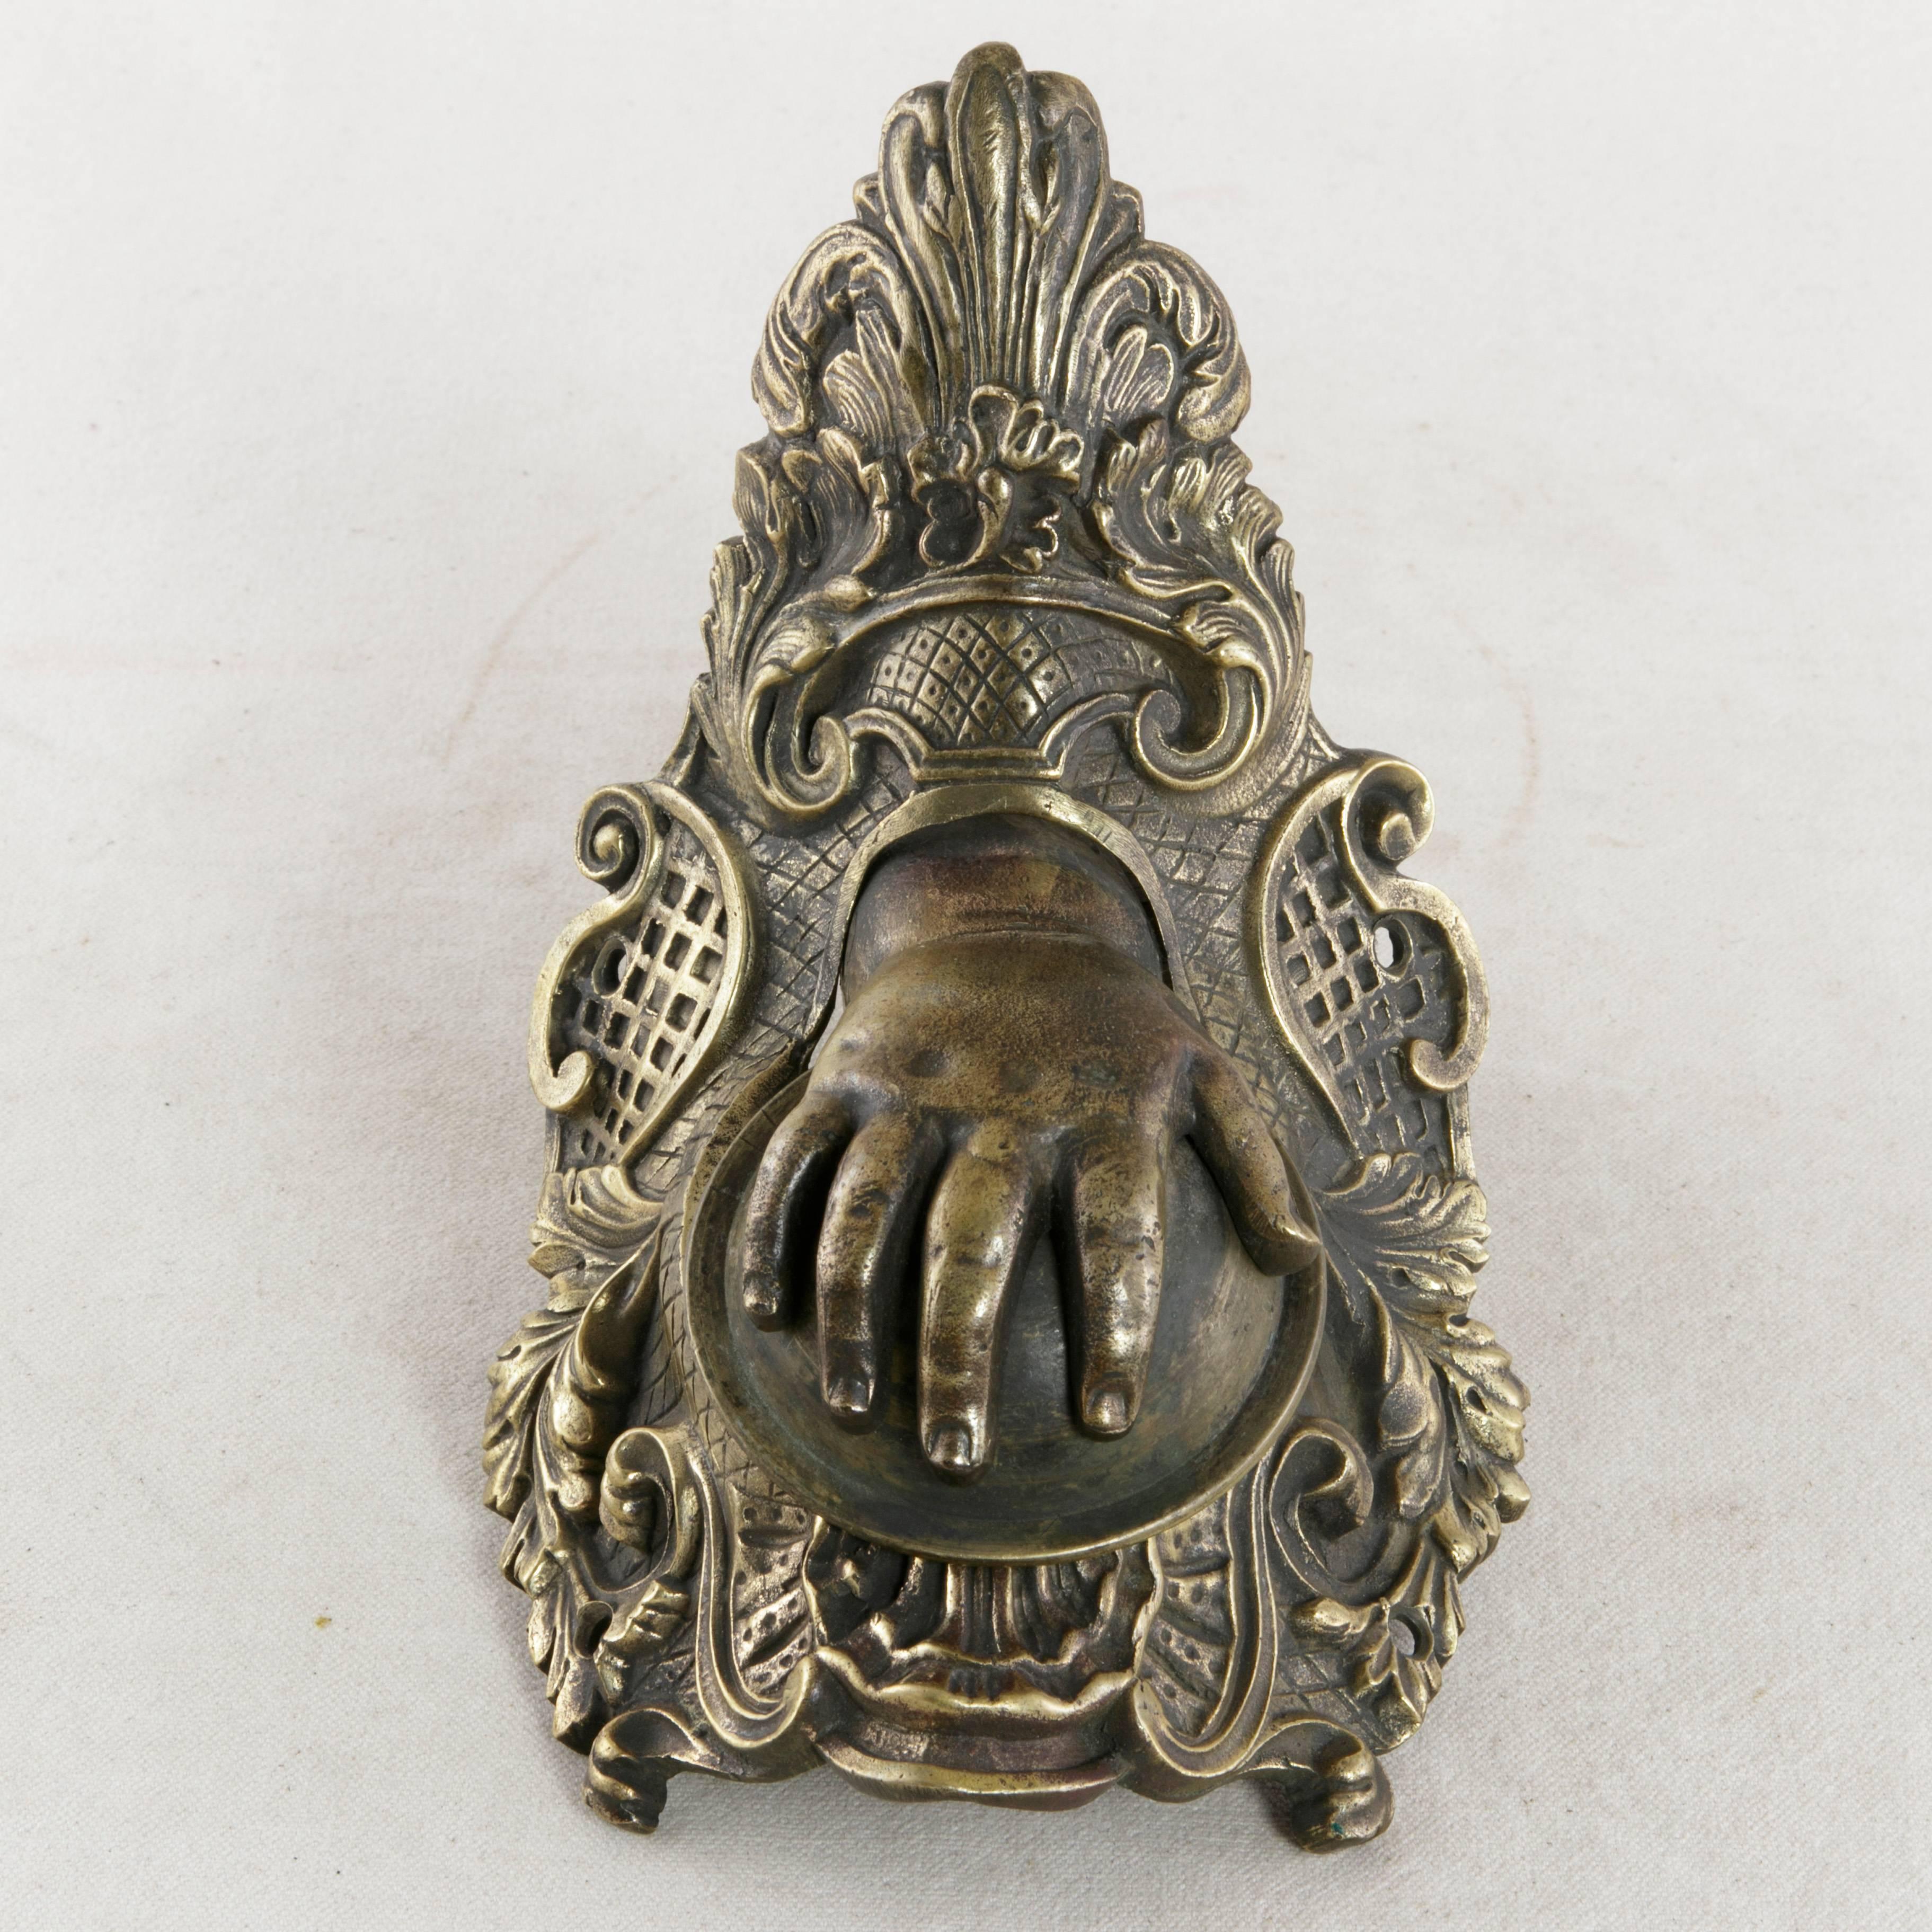 This 19th century Napoleon III period solid bronze billiard corner pocket features a dimpled child's hand. As a corner pocket on its original billiard table of the 1860s, the hand dropped forward when the billiard ball rolled into the pocket.